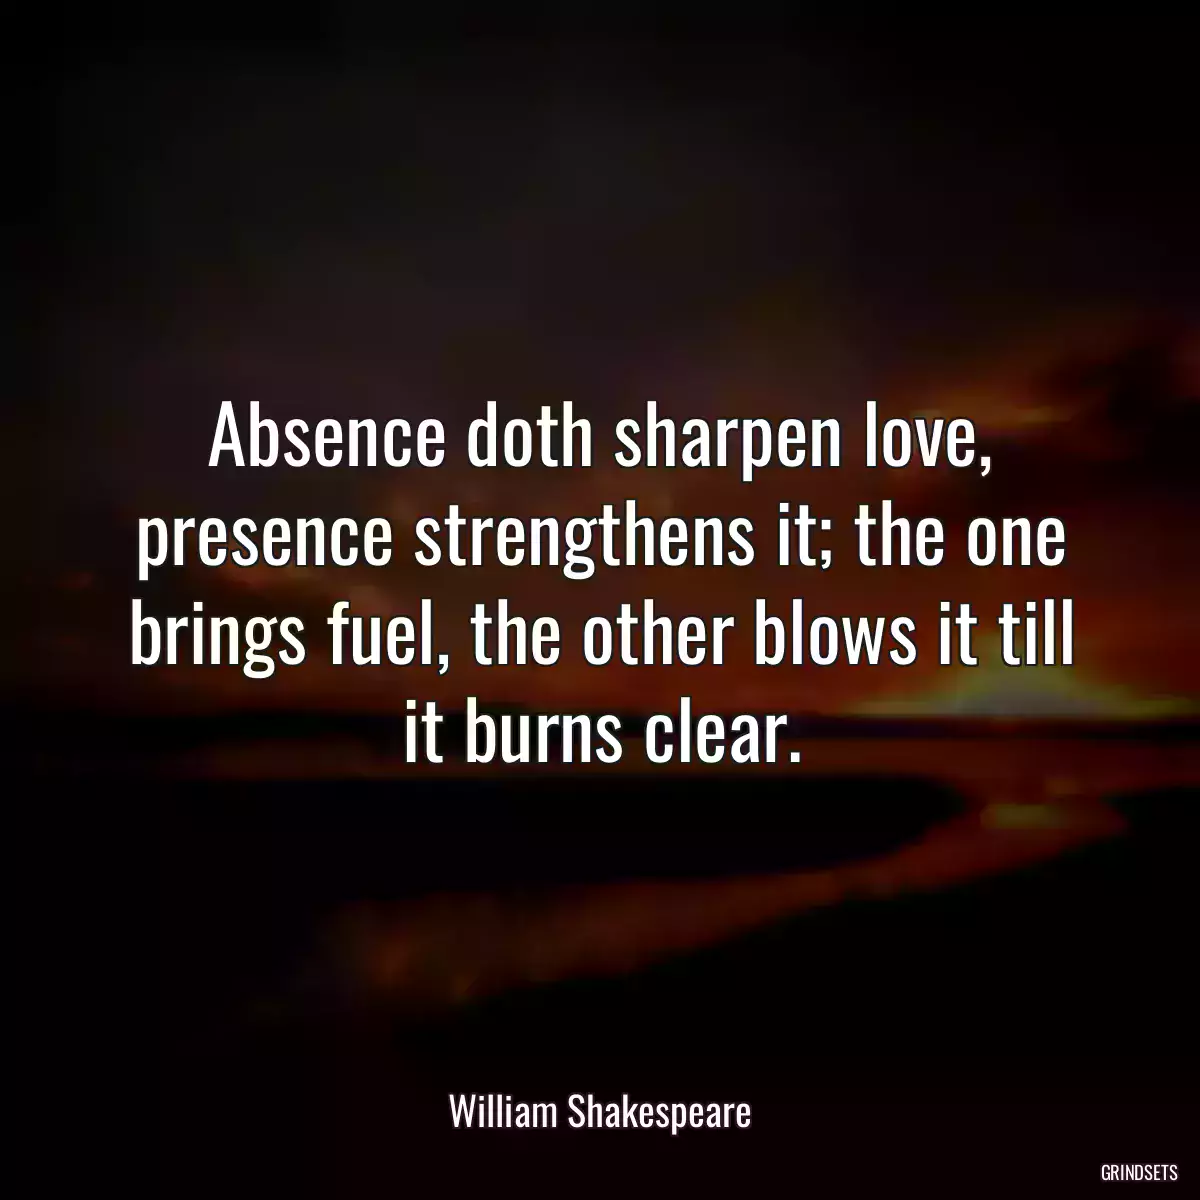 Absence doth sharpen love, presence strengthens it; the one brings fuel, the other blows it till it burns clear.